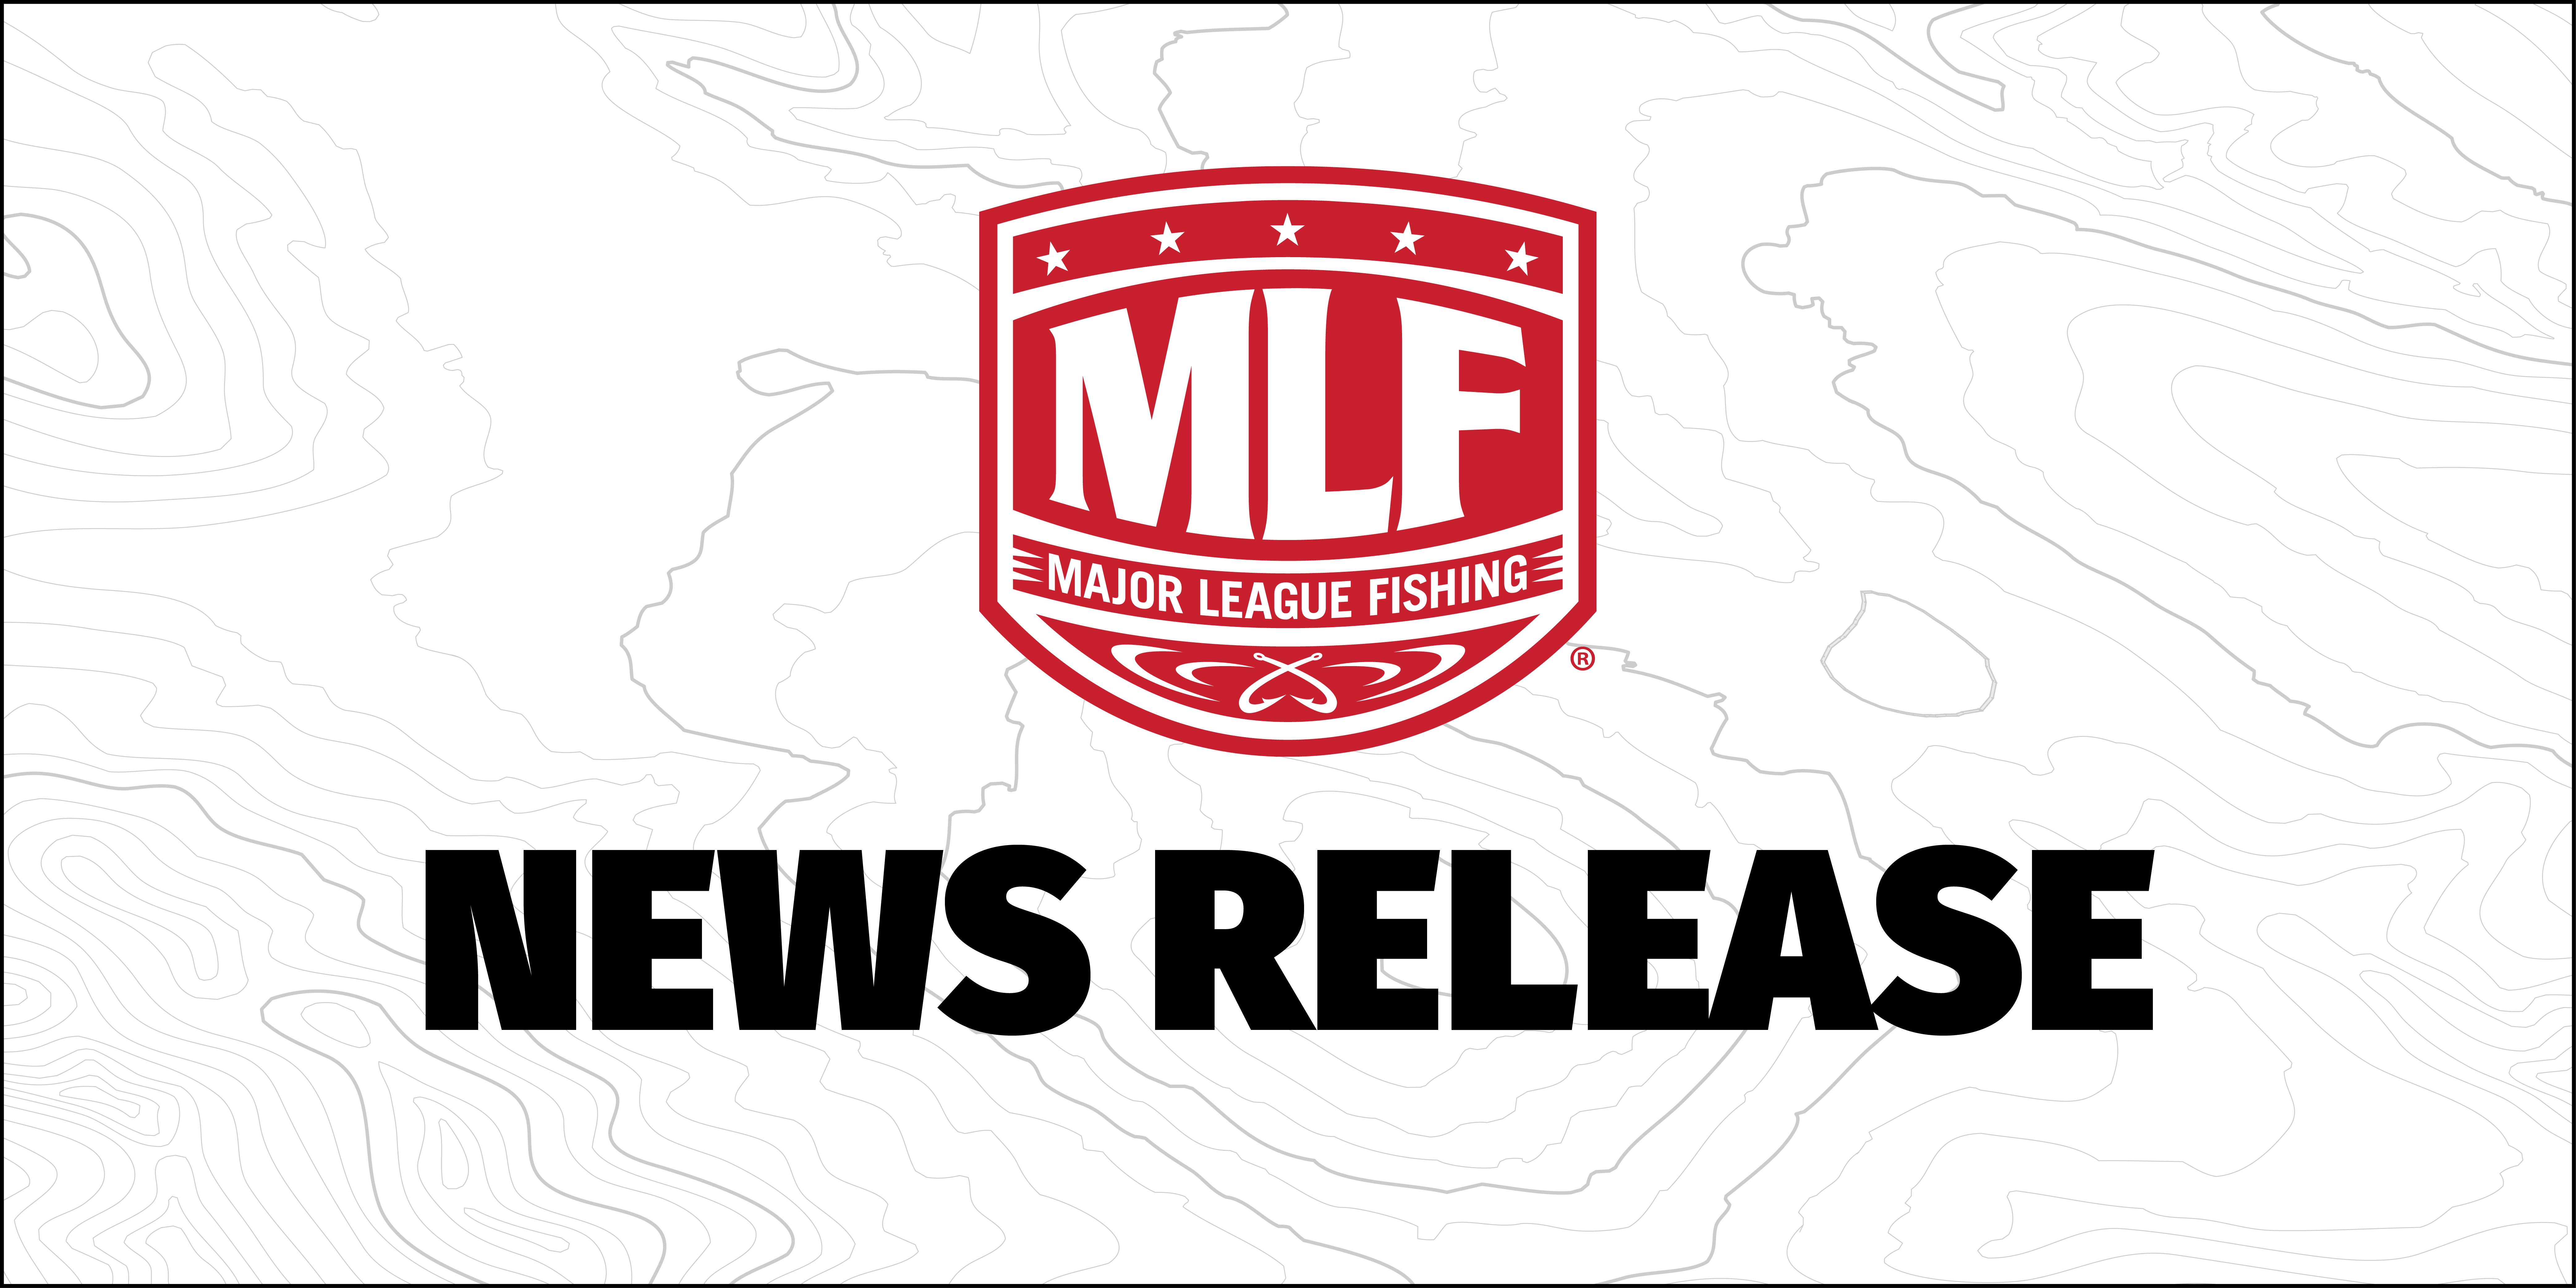 Mossy Oak and Major League Fishing Announce New Licensing